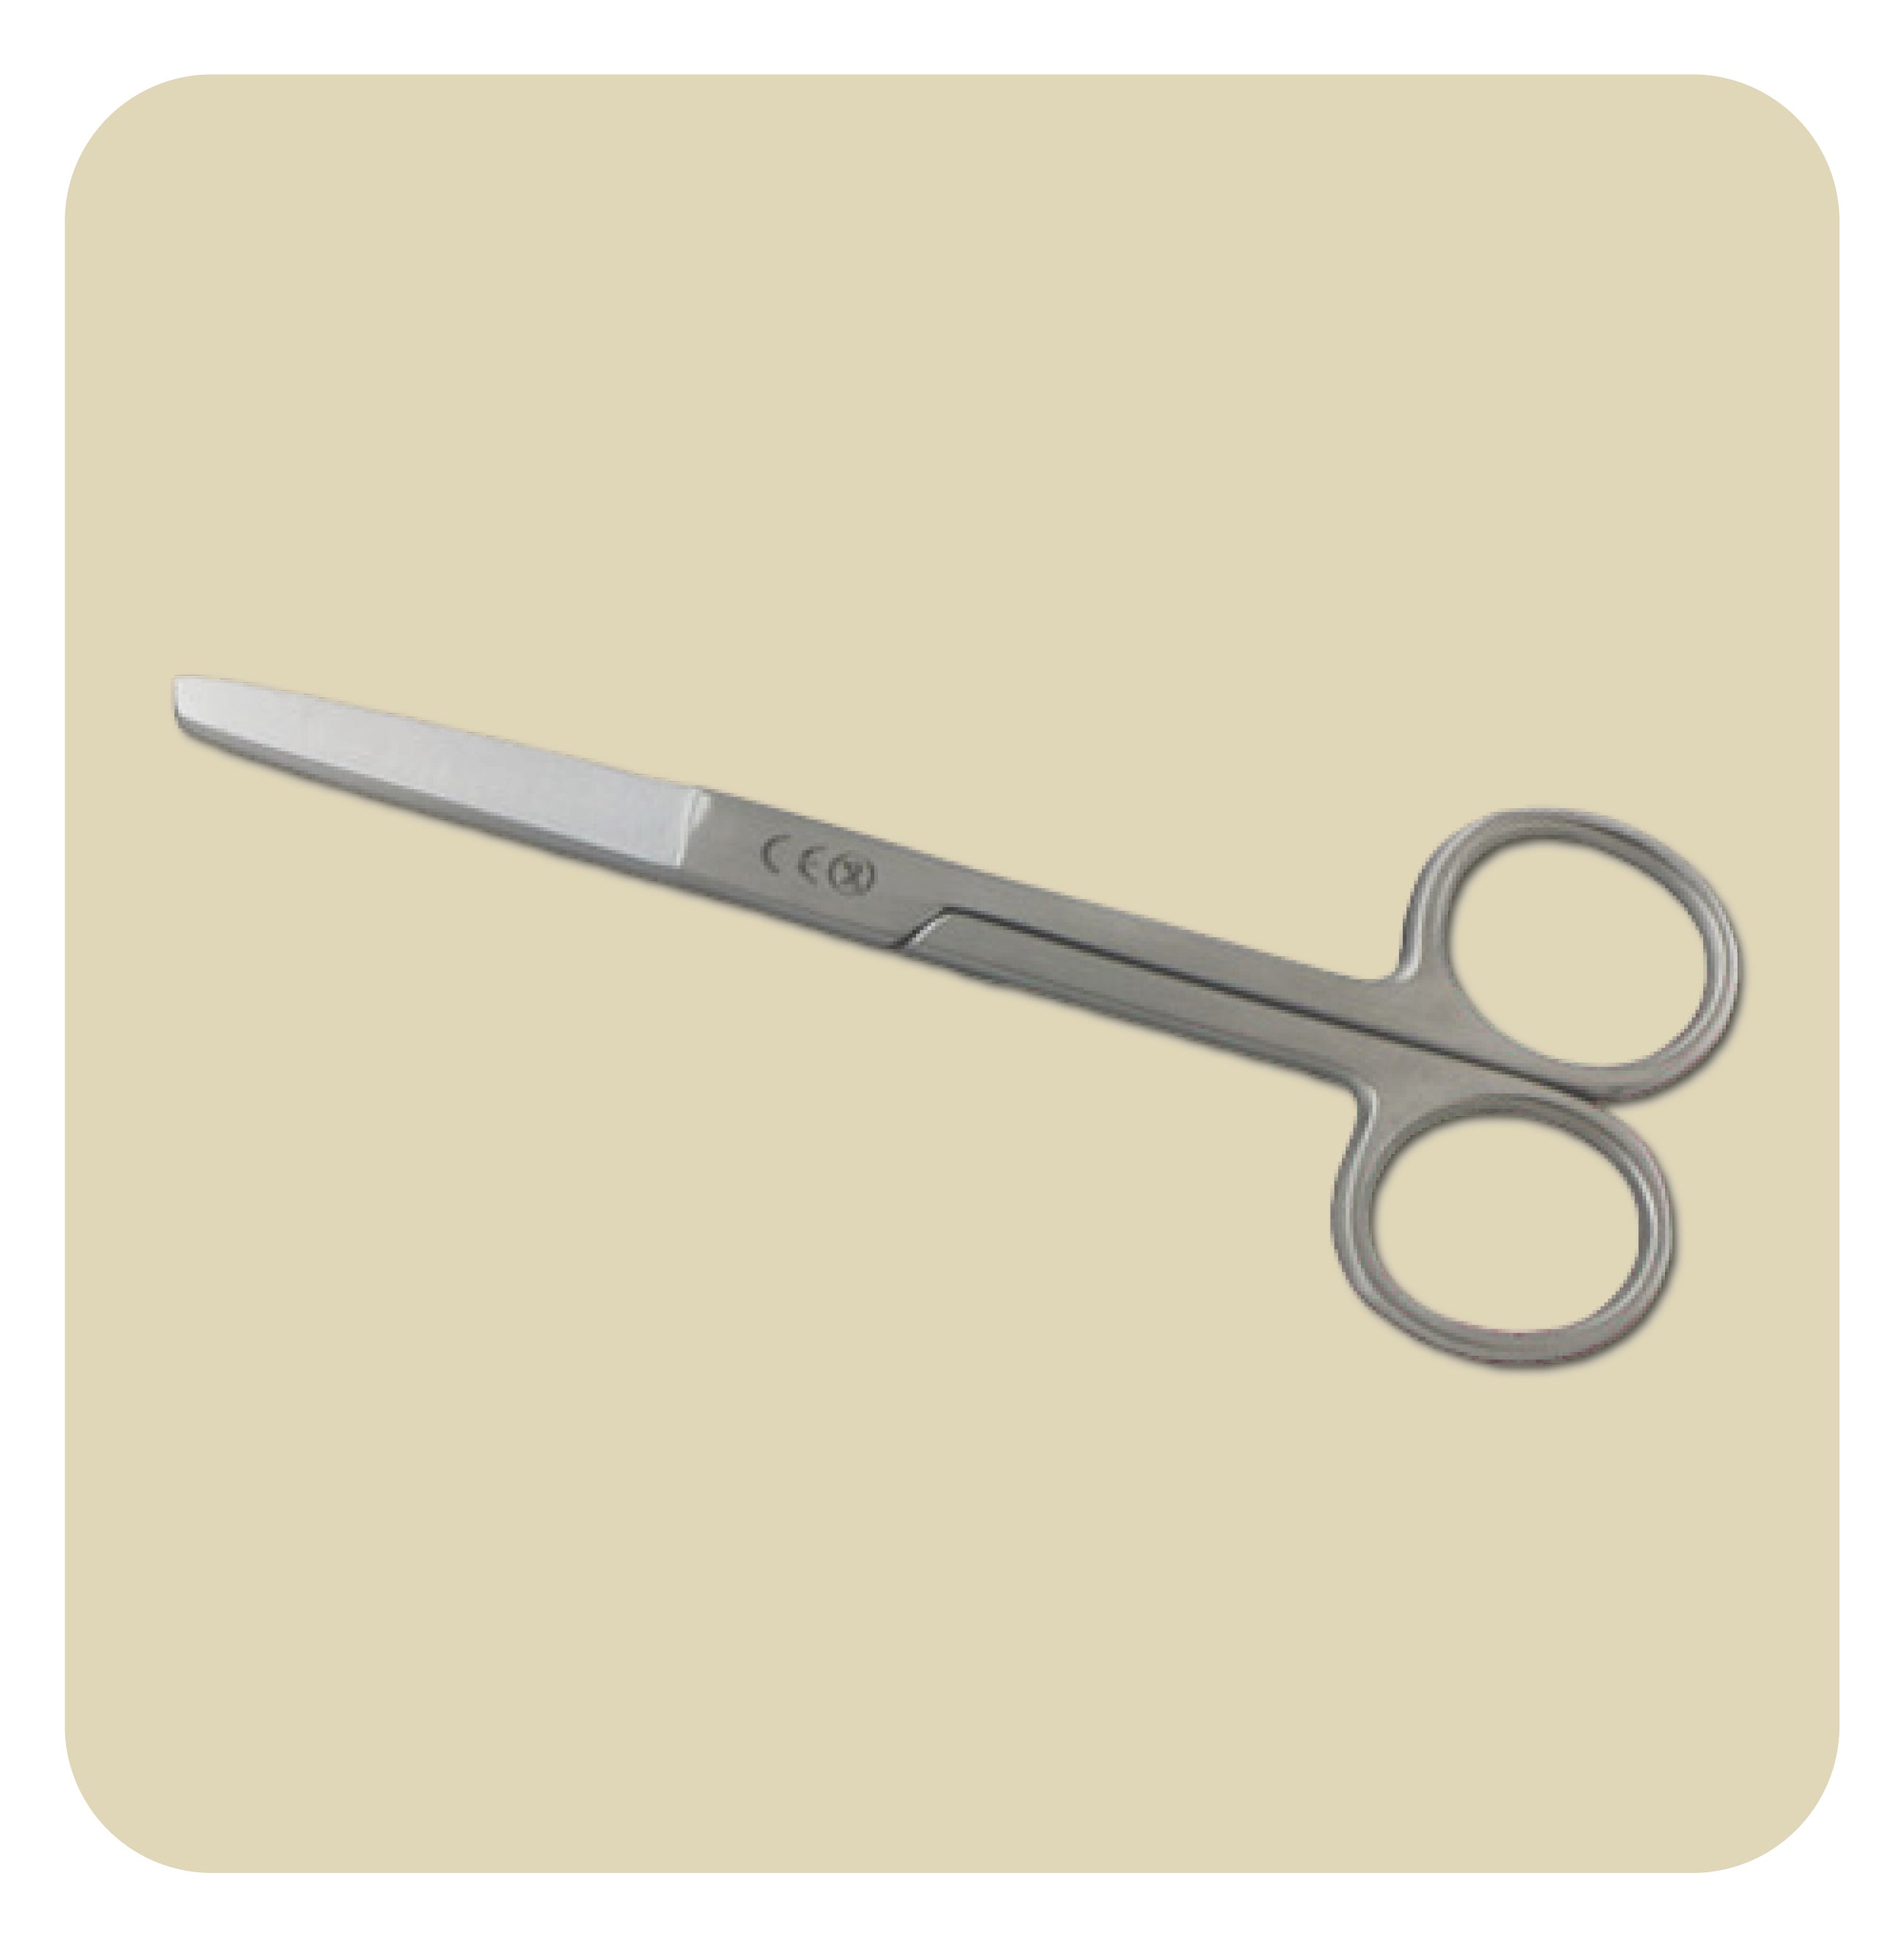 Single-use sterile stainless steel straight dolphin scissors - 13 cm